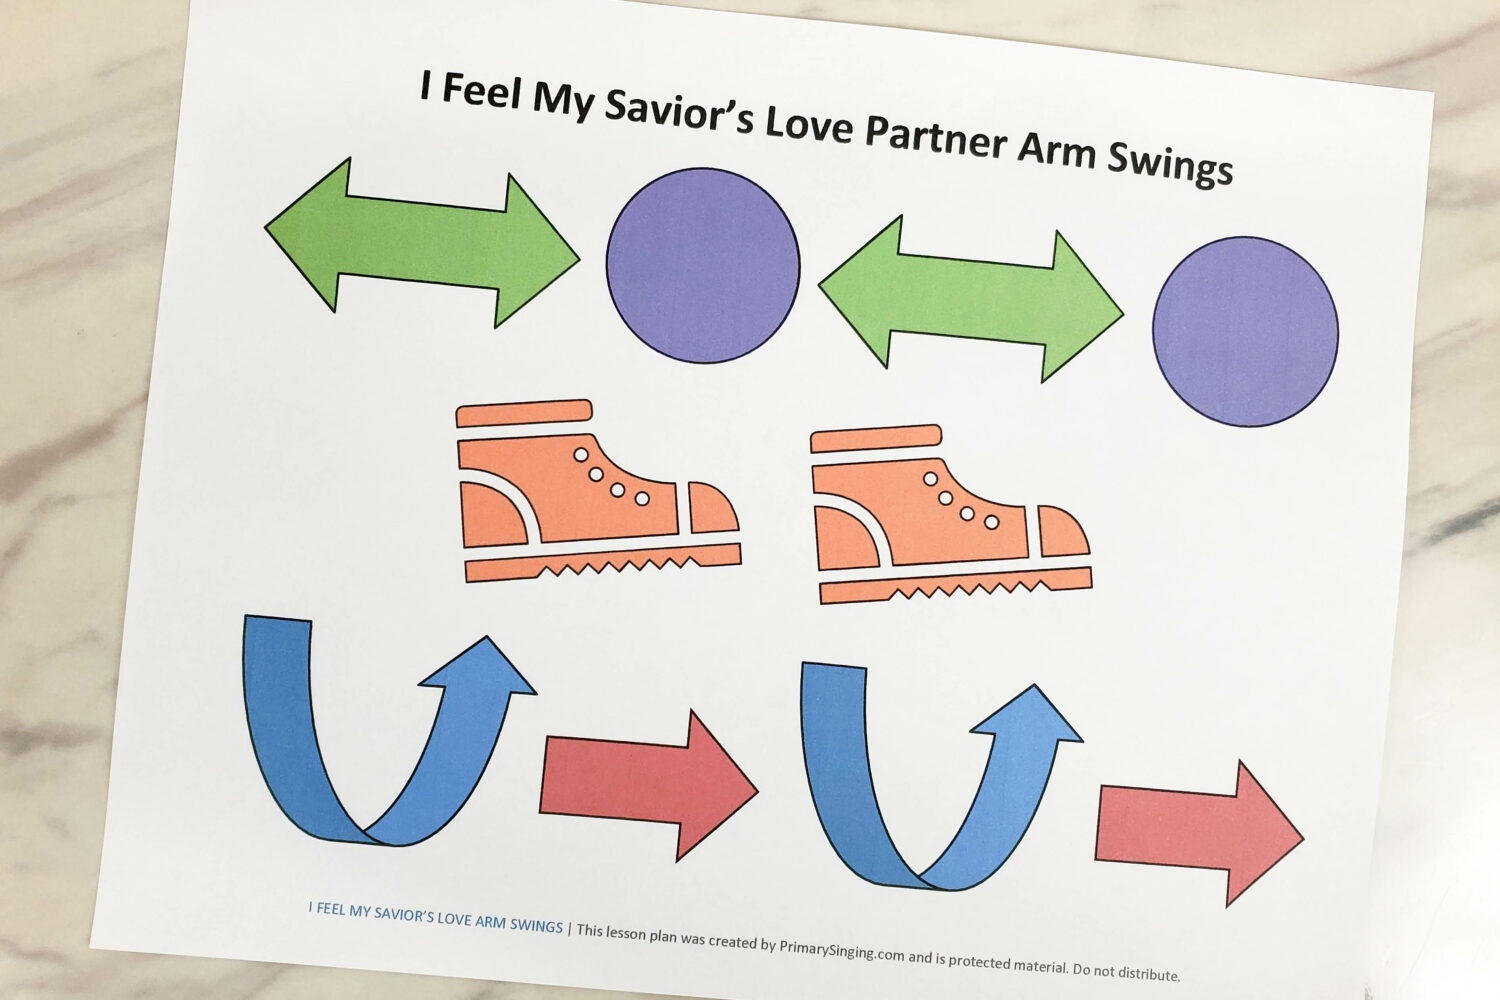 For a fun way to review I Feel My Savior's Love this month, try out this simple I Feel My Savior's Love Partner Arm Swings activity! Have each child find a partner and have some fun with this people interactions activity! #LDS #Primary #Singingtime #Musicleader